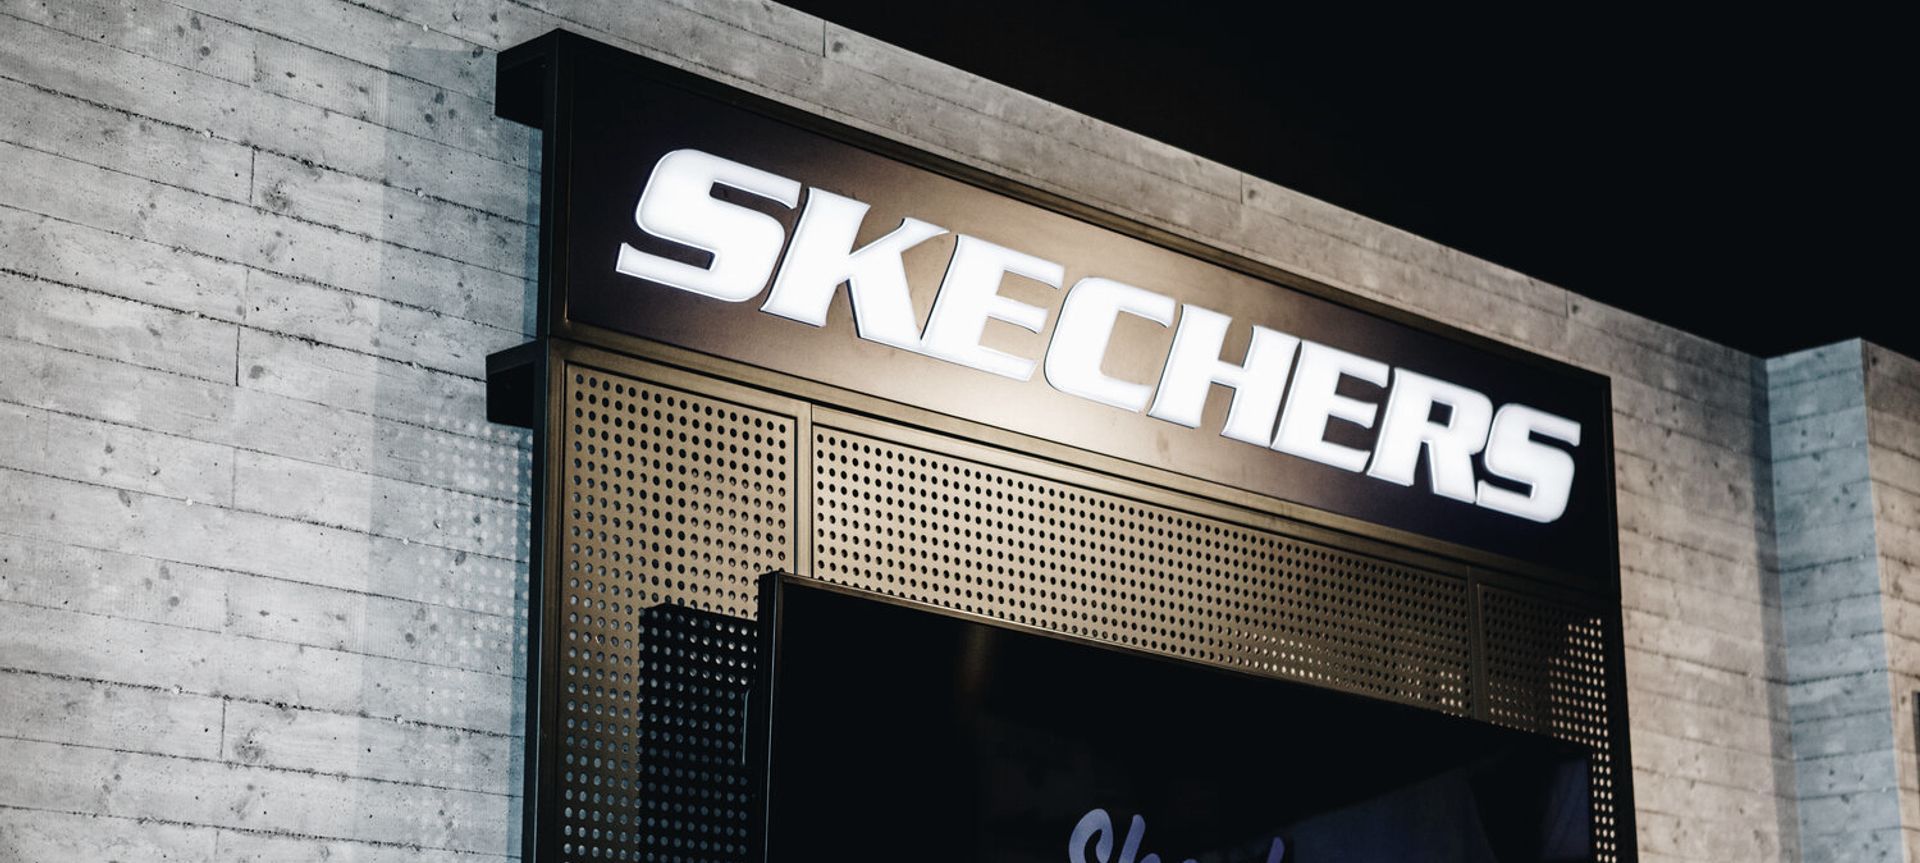 Skechers | Westfield Newmarket by Fitout Solutions | ArchiPro NZ